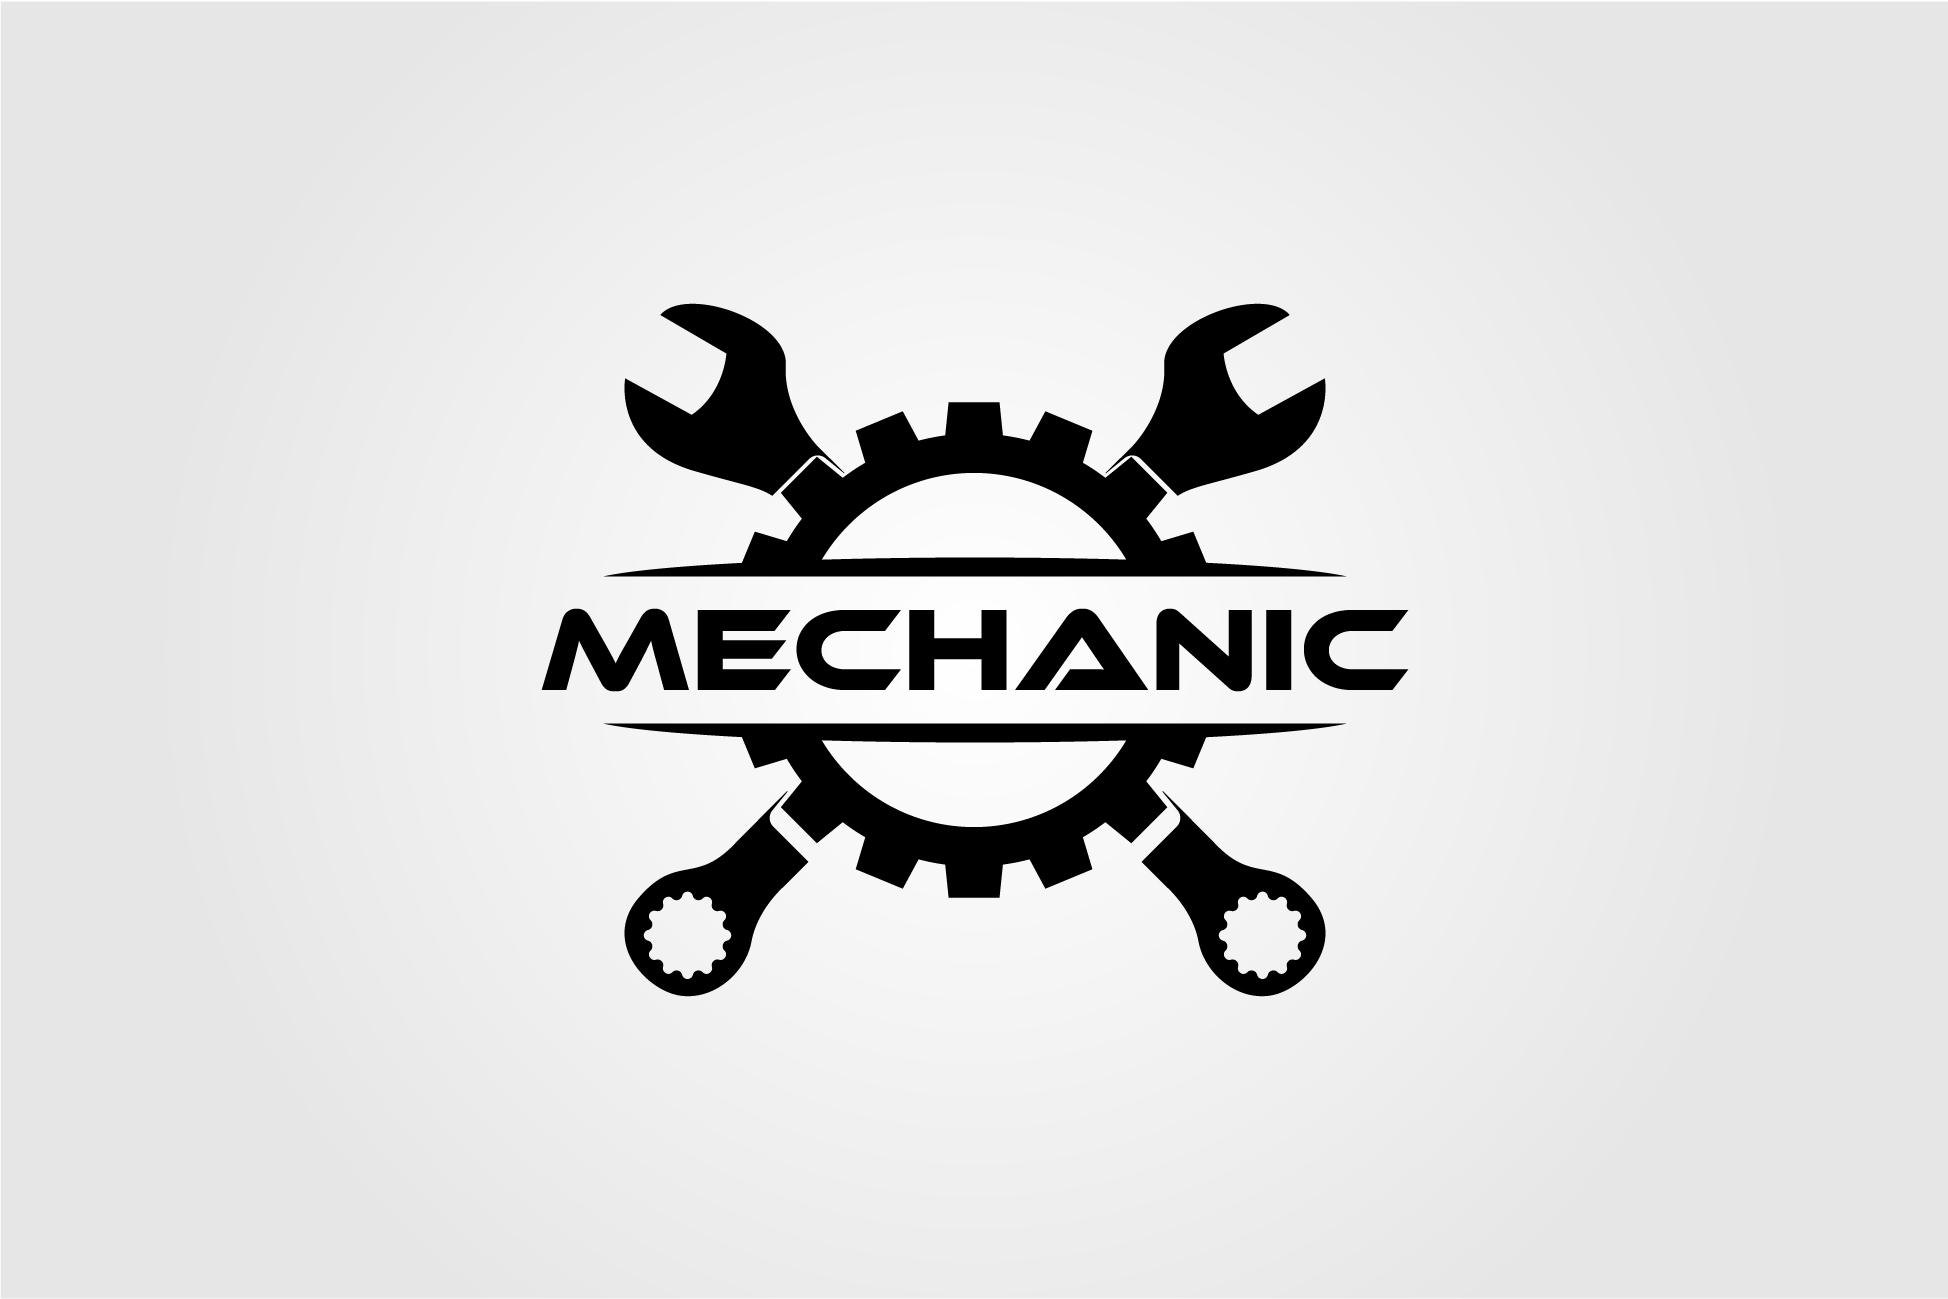 Mechanic Gear And Wrench Logo Design Graphic By Lawoel · Creative Fabrica